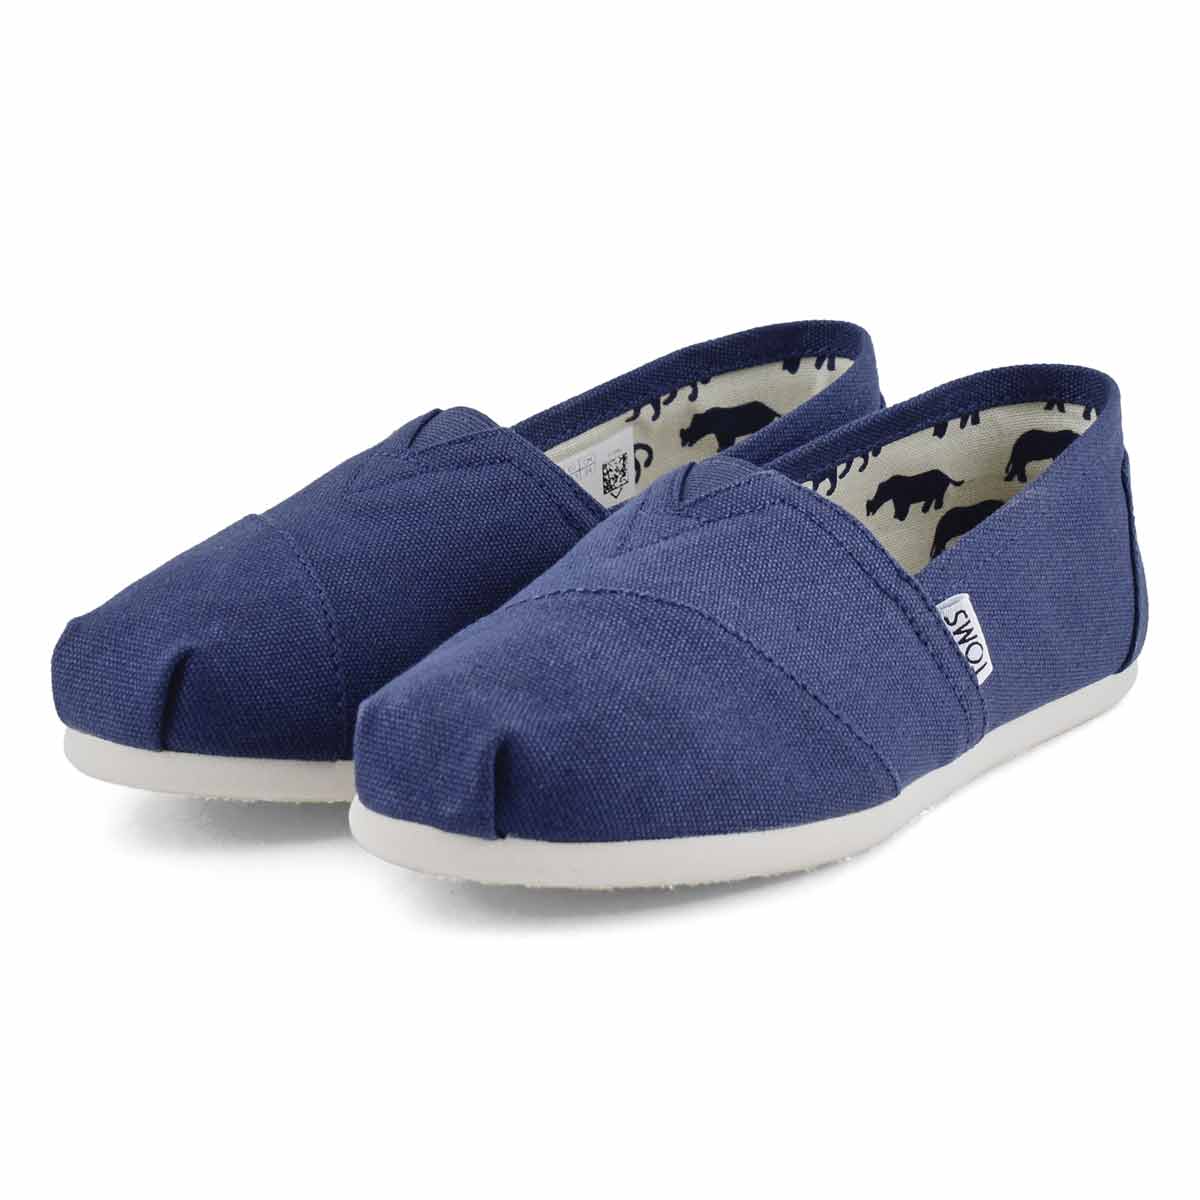 Women's Classic Canvas Loafer - Navys